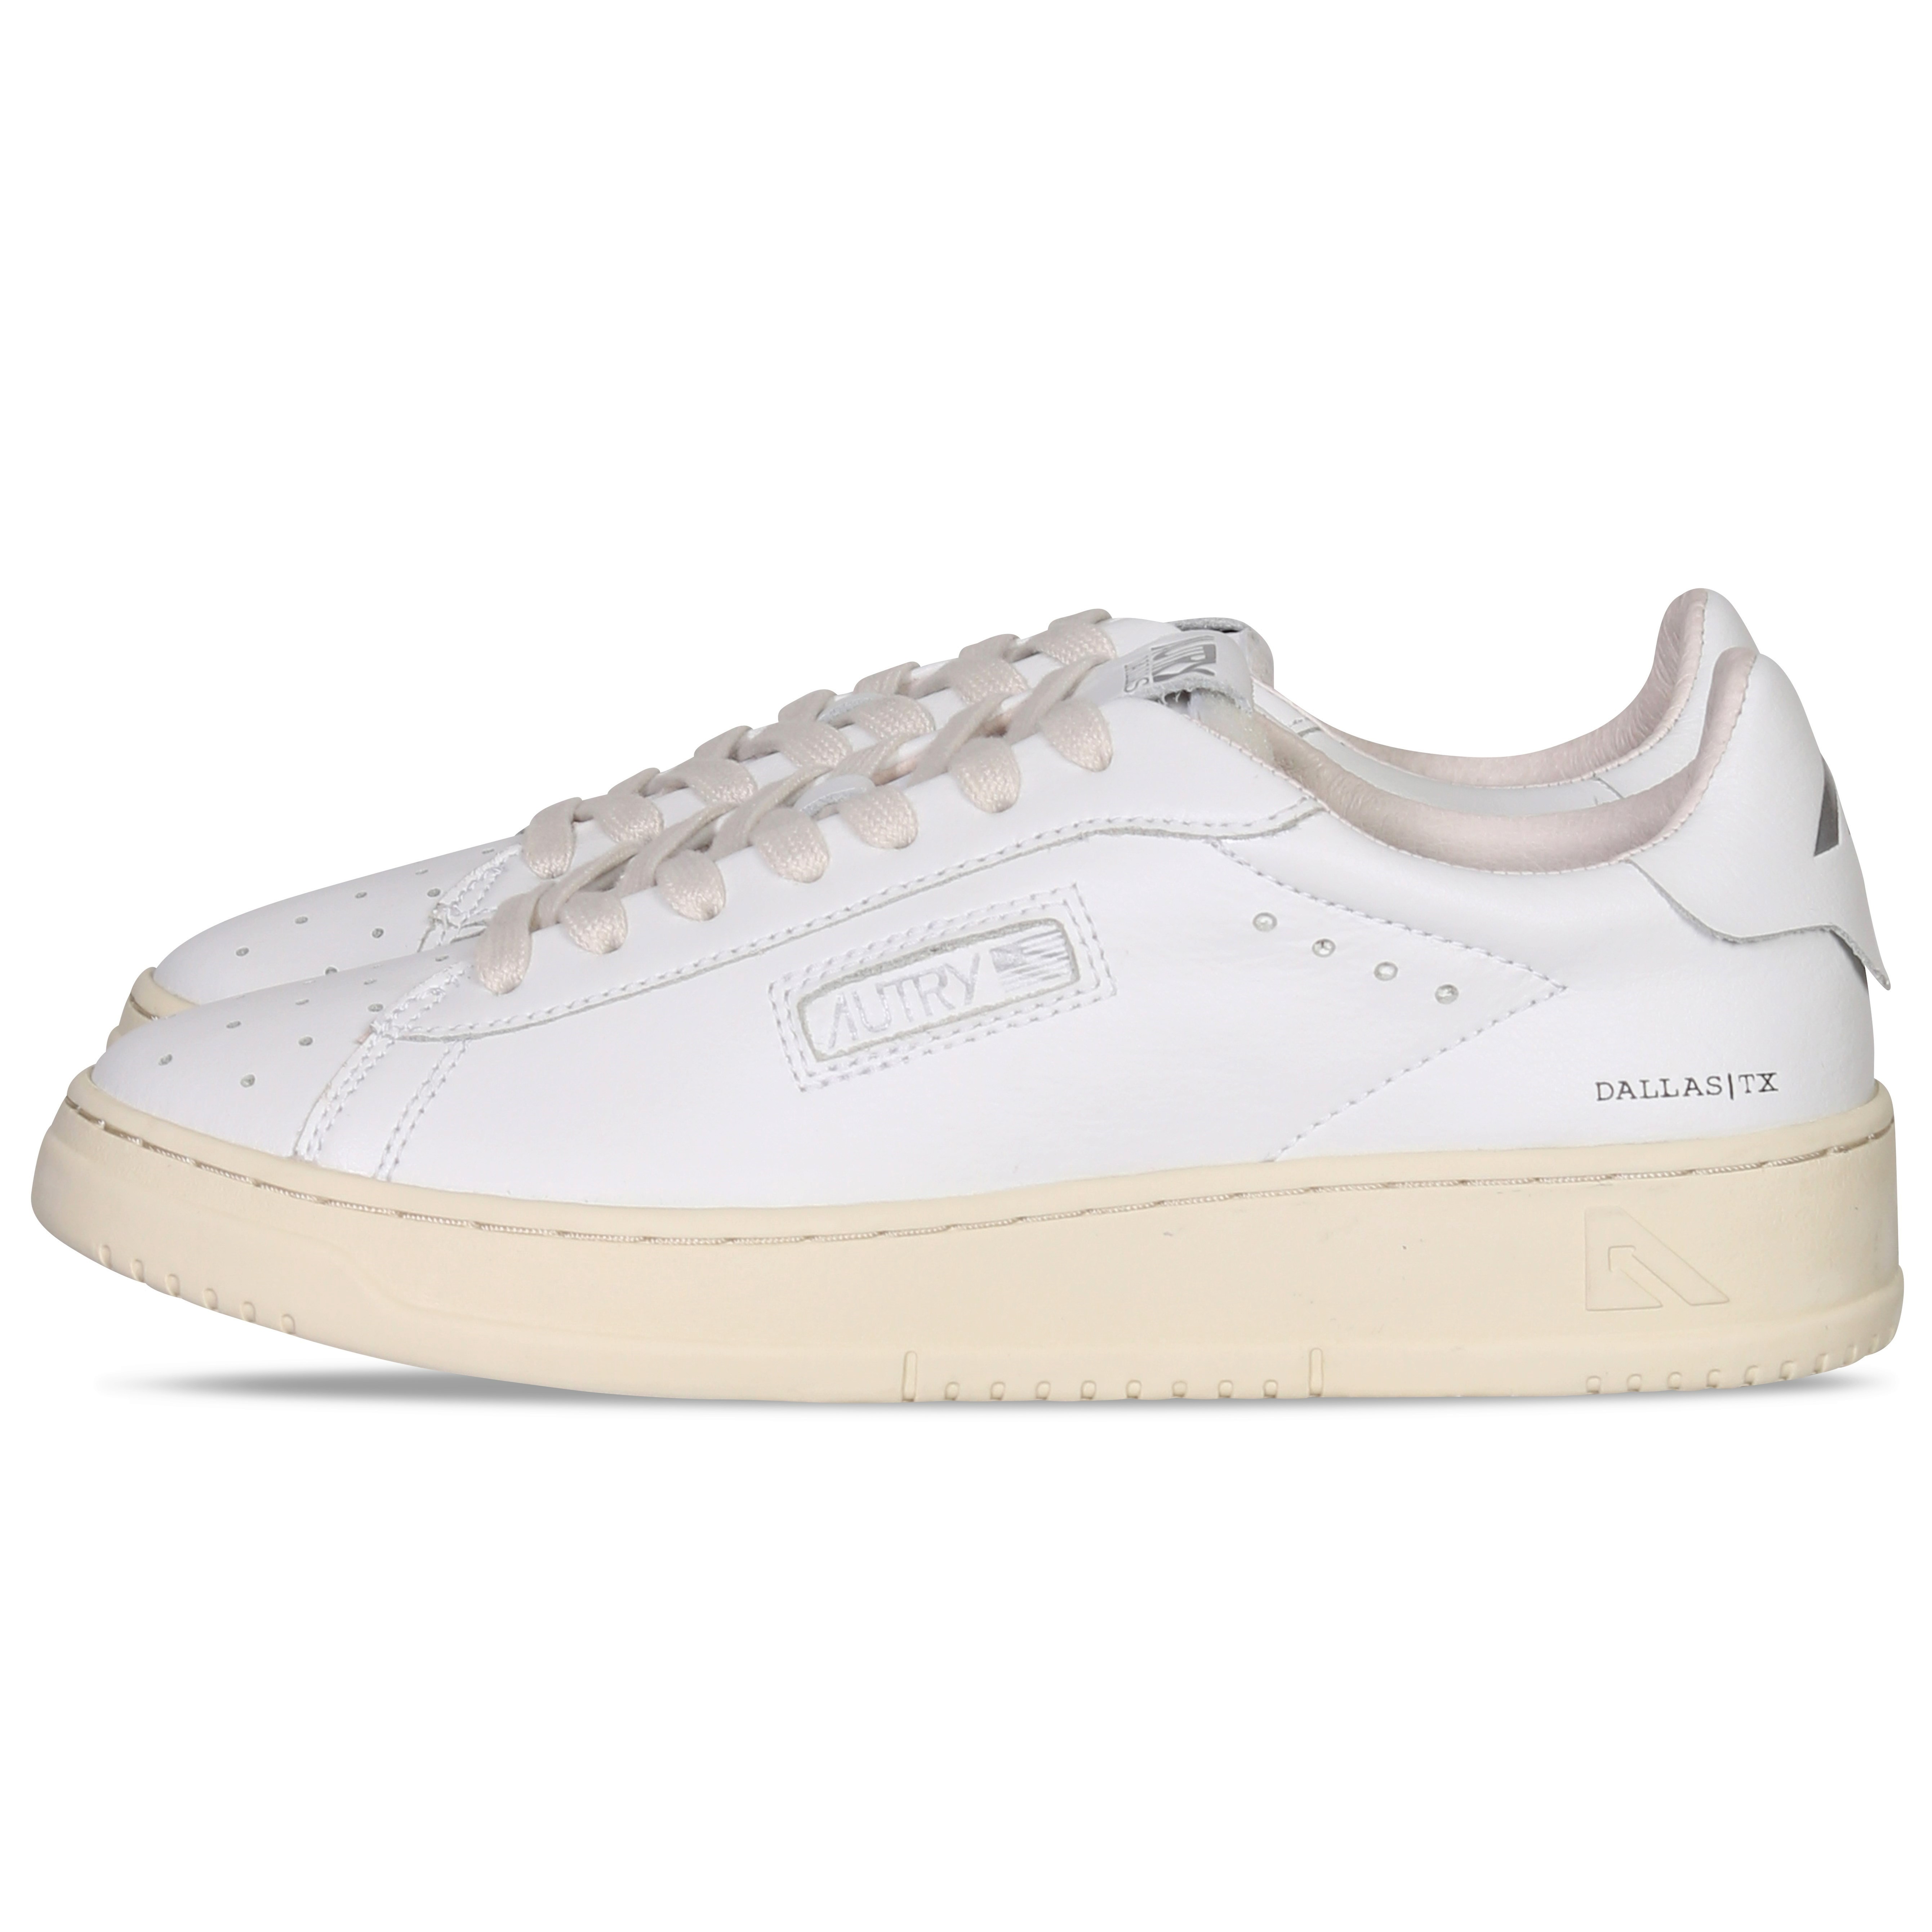 Autry Action Shoes Dallas Low Sneaker White/Silver